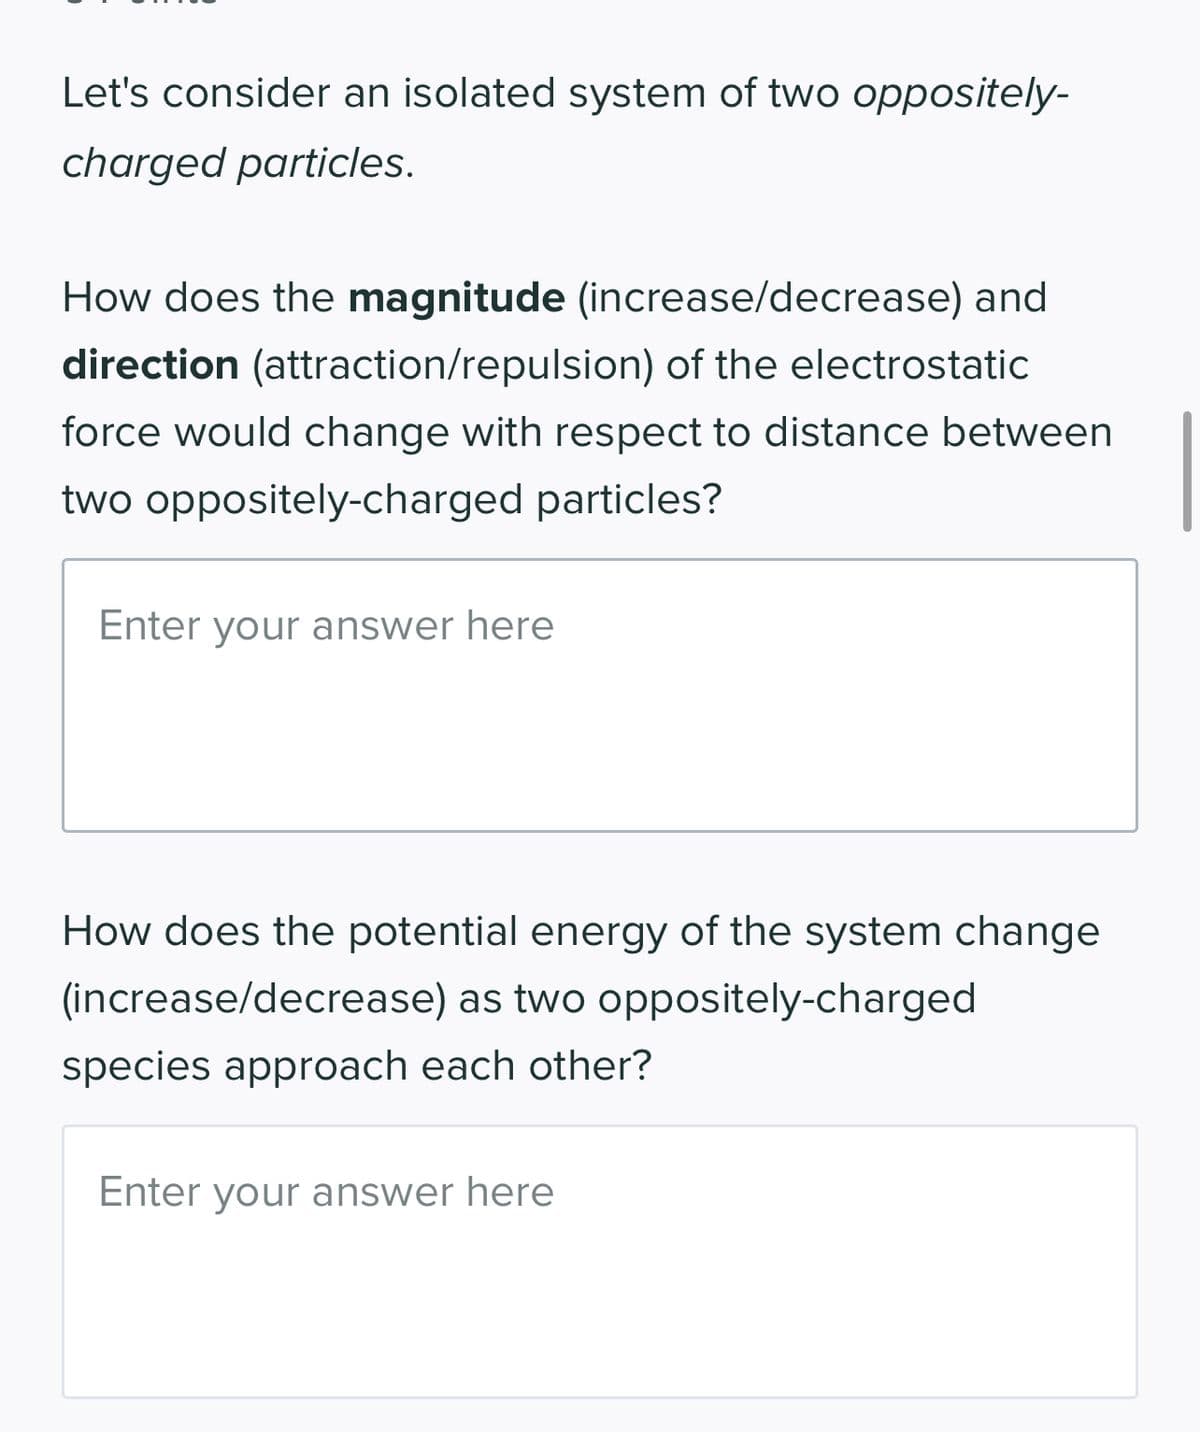 Let's consider an isolated system of two oppositely-
charged particles.
How does the magnitude (increase/decrease) and
direction (attraction/repulsion) of the electrostatic
force would change with respect to distance between
two oppositely-charged particles?
Enter your answer here
How does the potential energy of the system change
(increase/decrease) as two oppositely-charged
species approach each other?
Enter your answer here